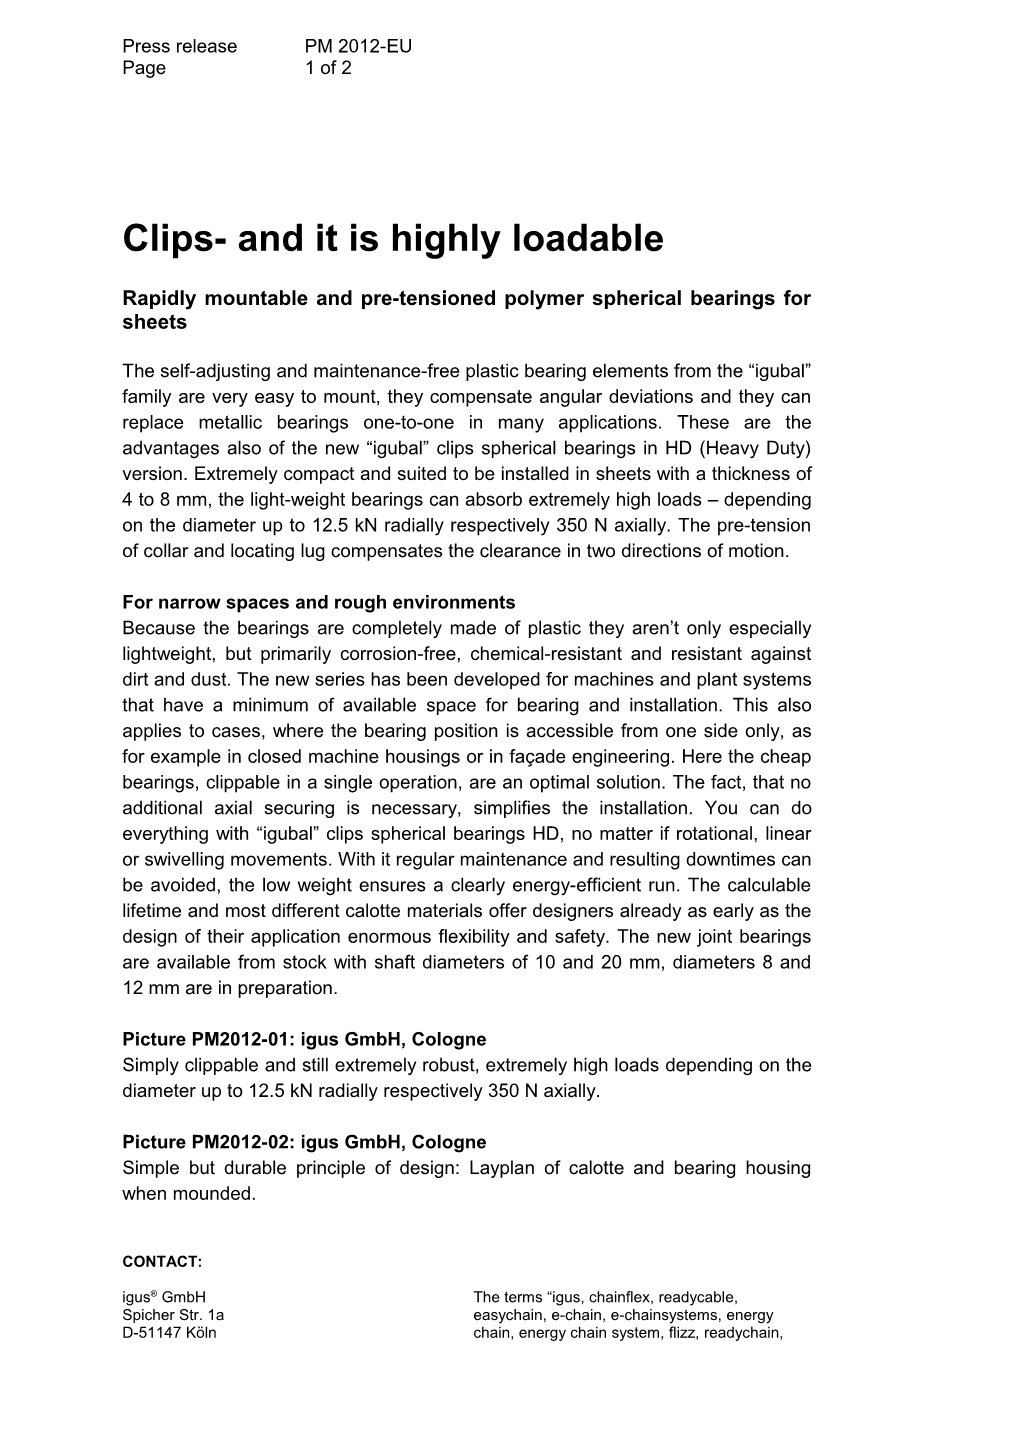 Clips- and It Is Highly Loadable